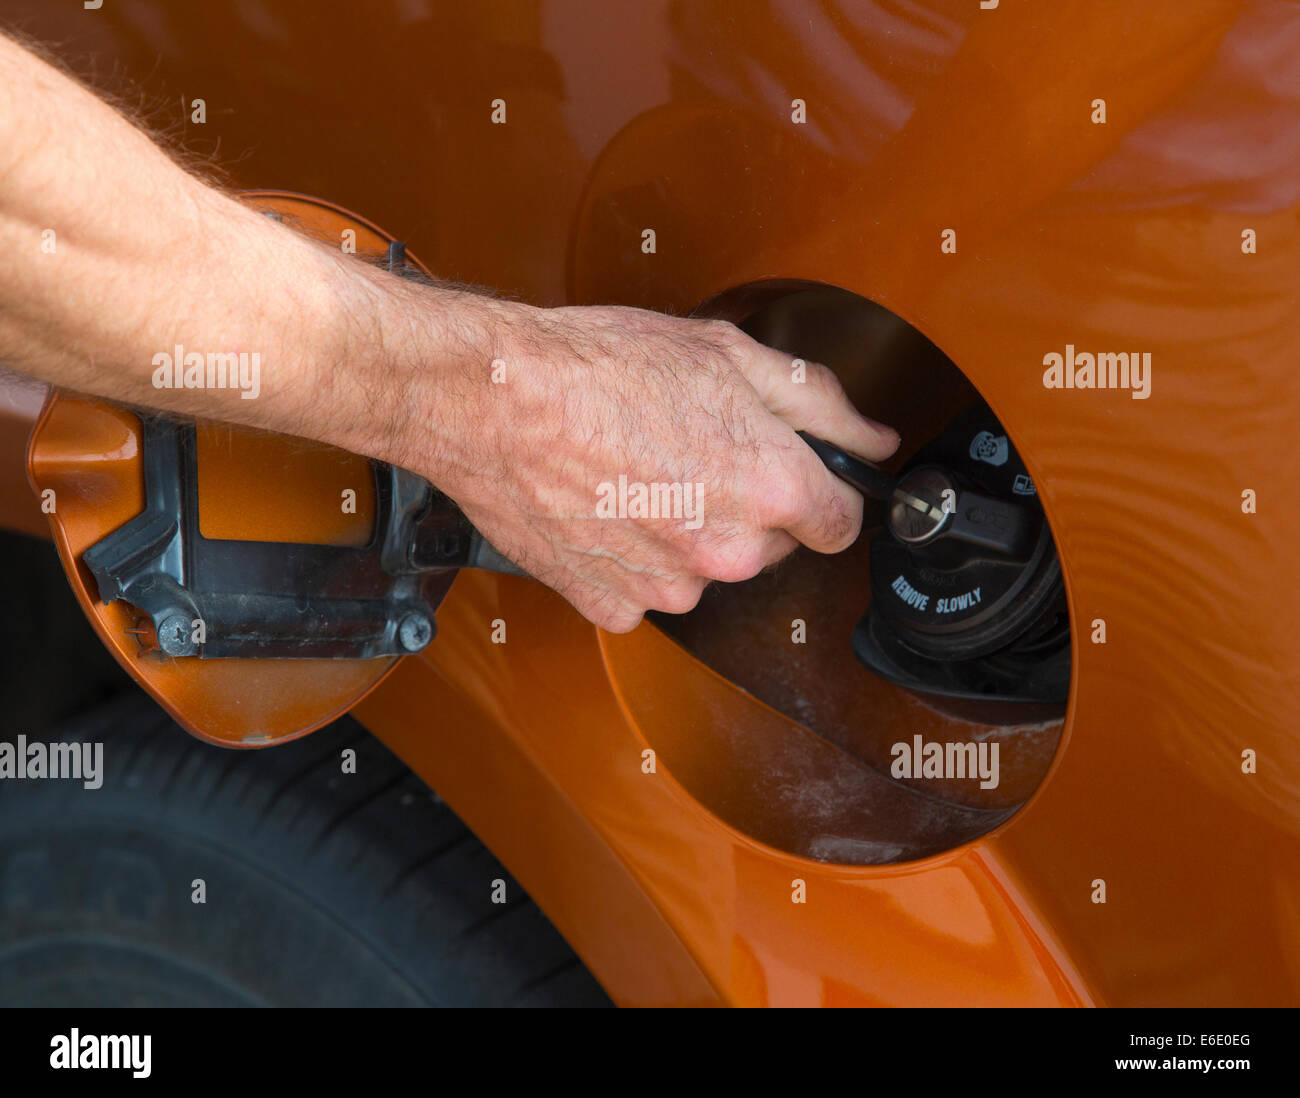 Man's hand unlocking an antitheft vehicle fuel cap with key at a gas station Stock Photo